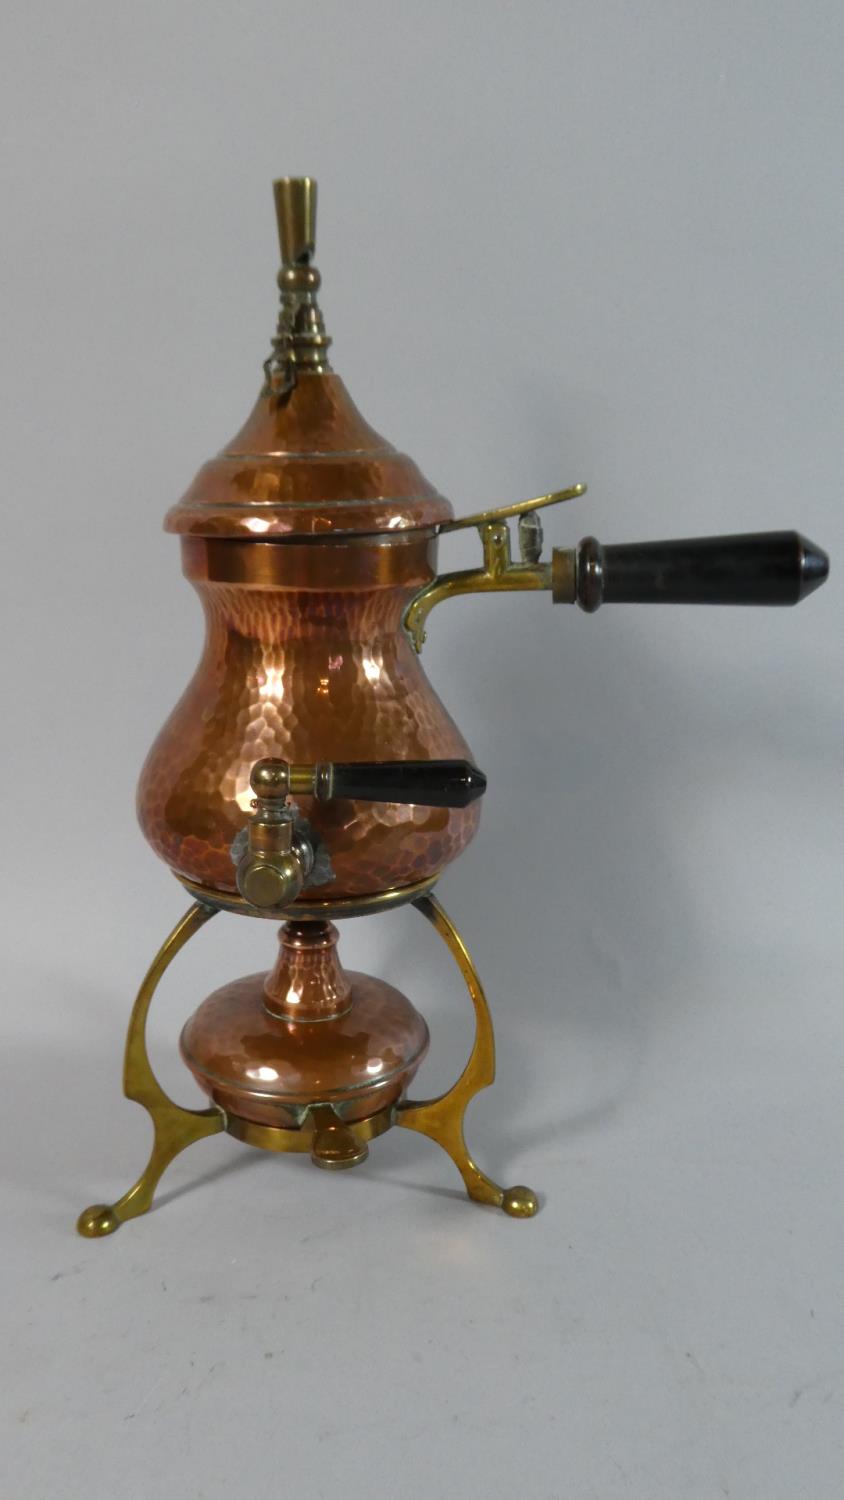 A German Copper Cafetiere Complete with Burner and Whistle Finial, 30.5cm High